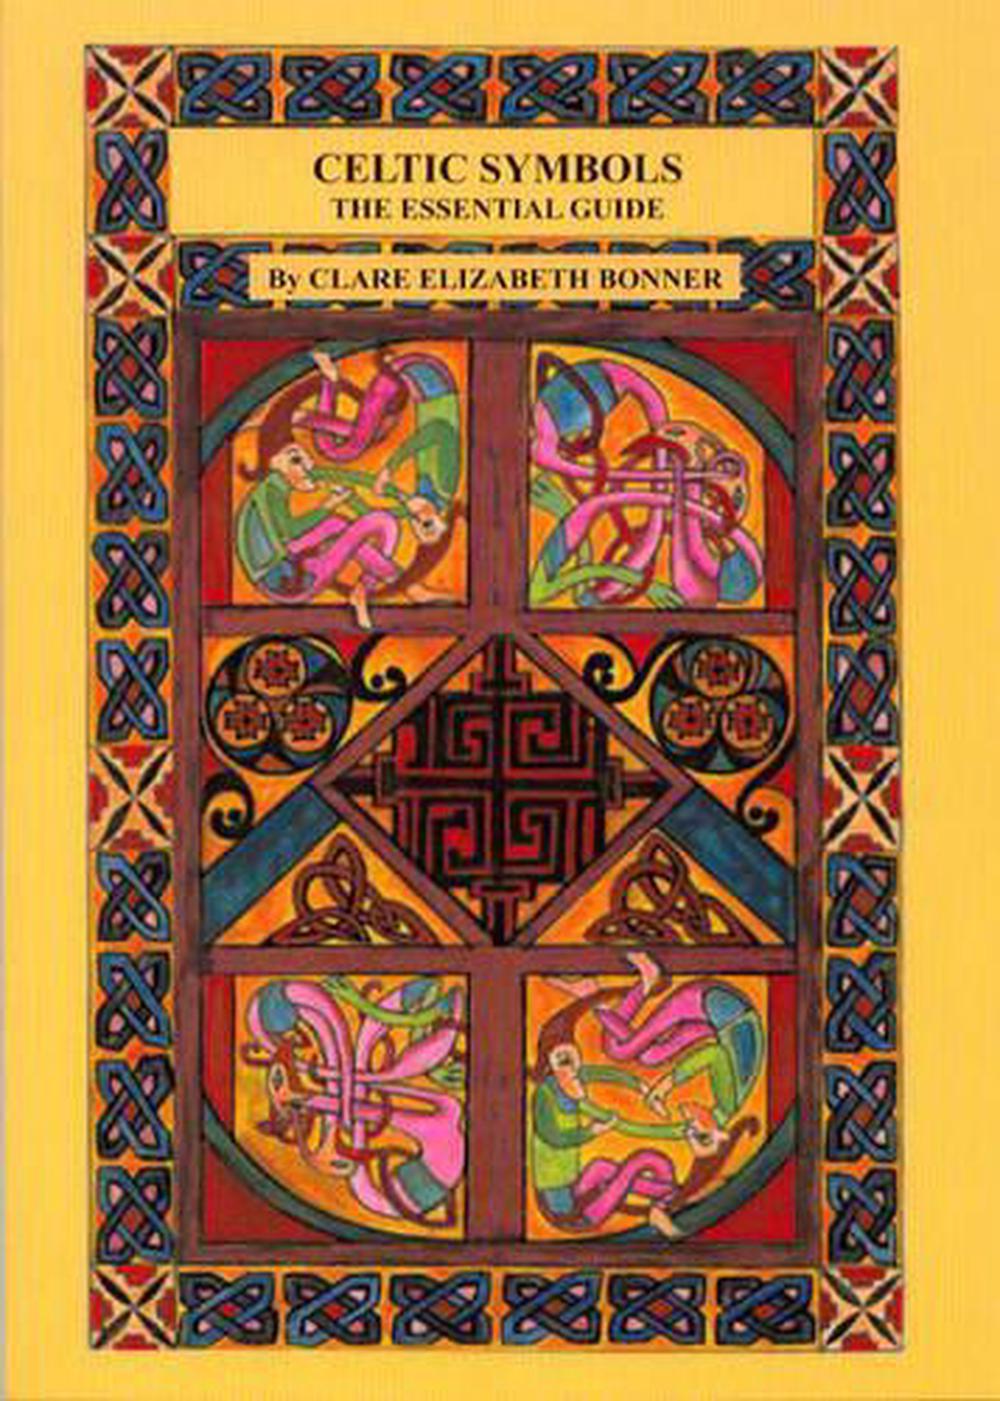 Celtic Symbols the Essential Guide by Clare Bonner Paperback Book Free ...